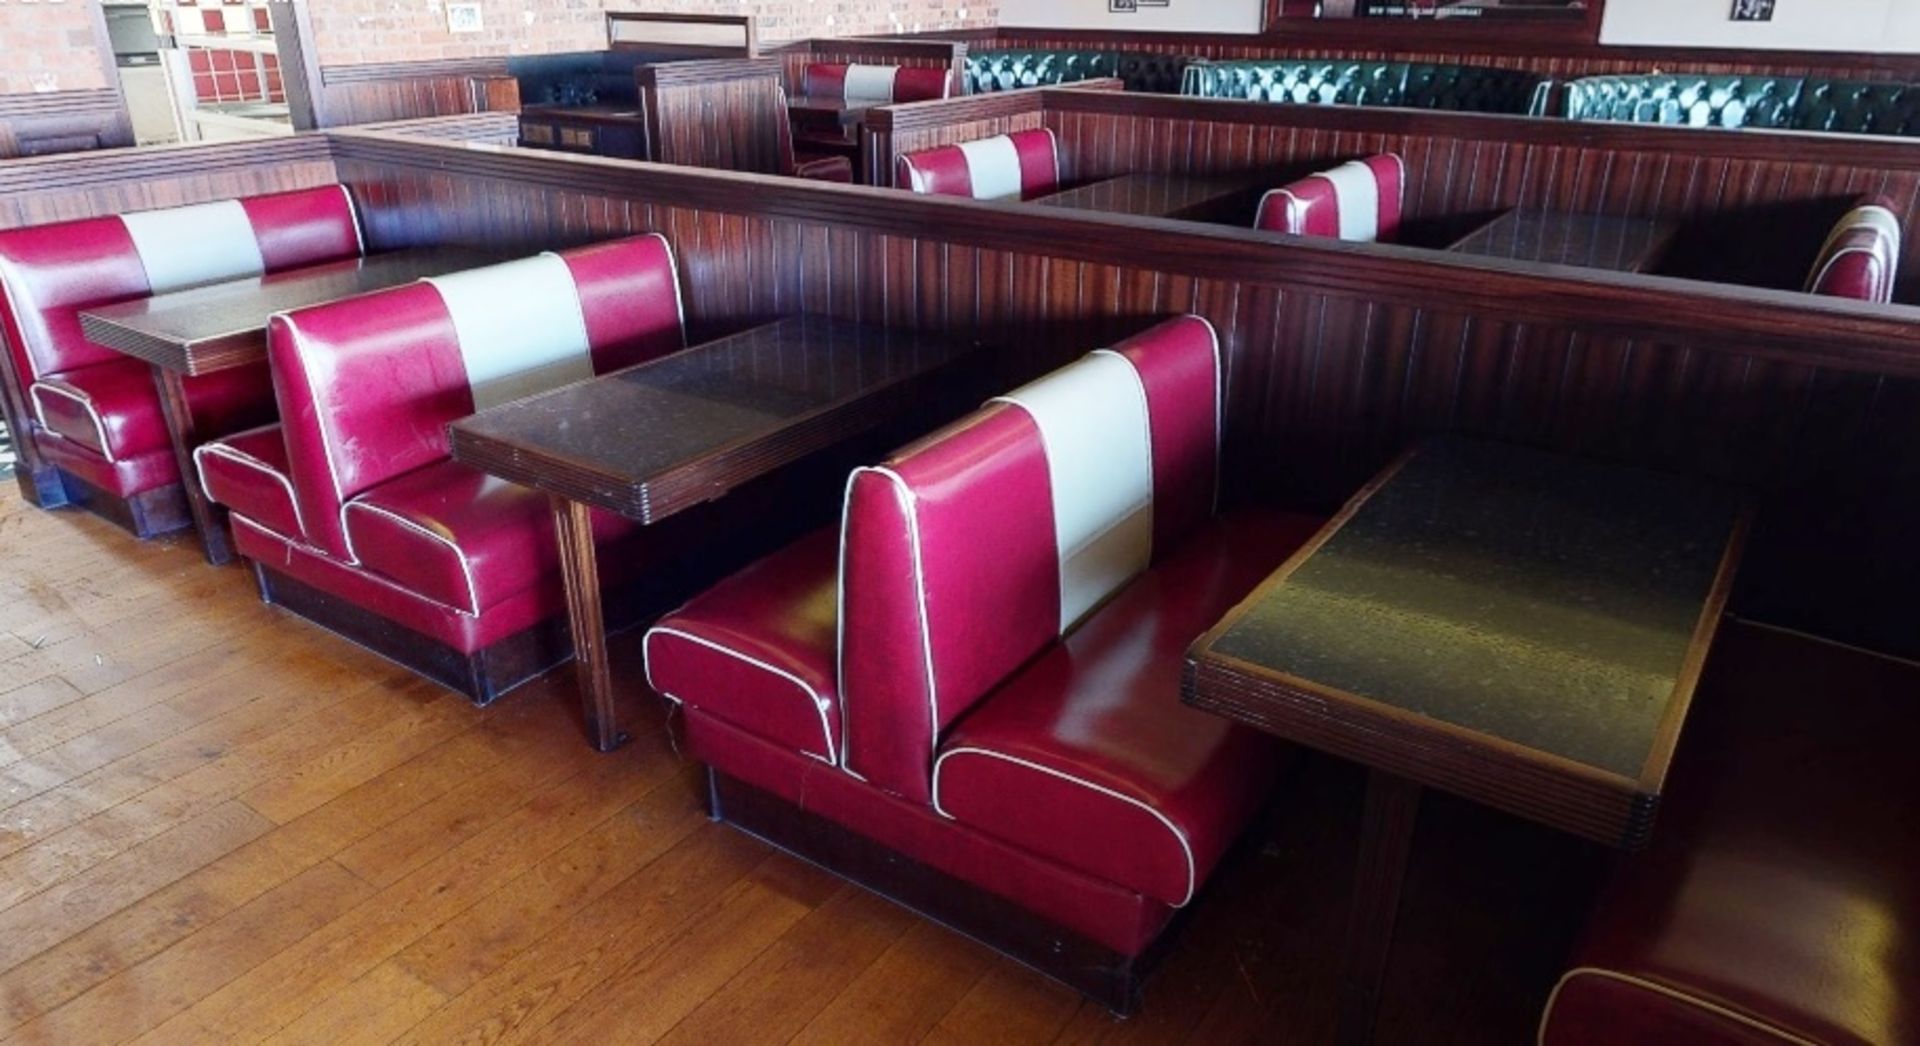 1 x Assorted Lot of Restaurant Seating Benches - Seats 18 Persons - American Diner Style in Red - Image 11 of 11